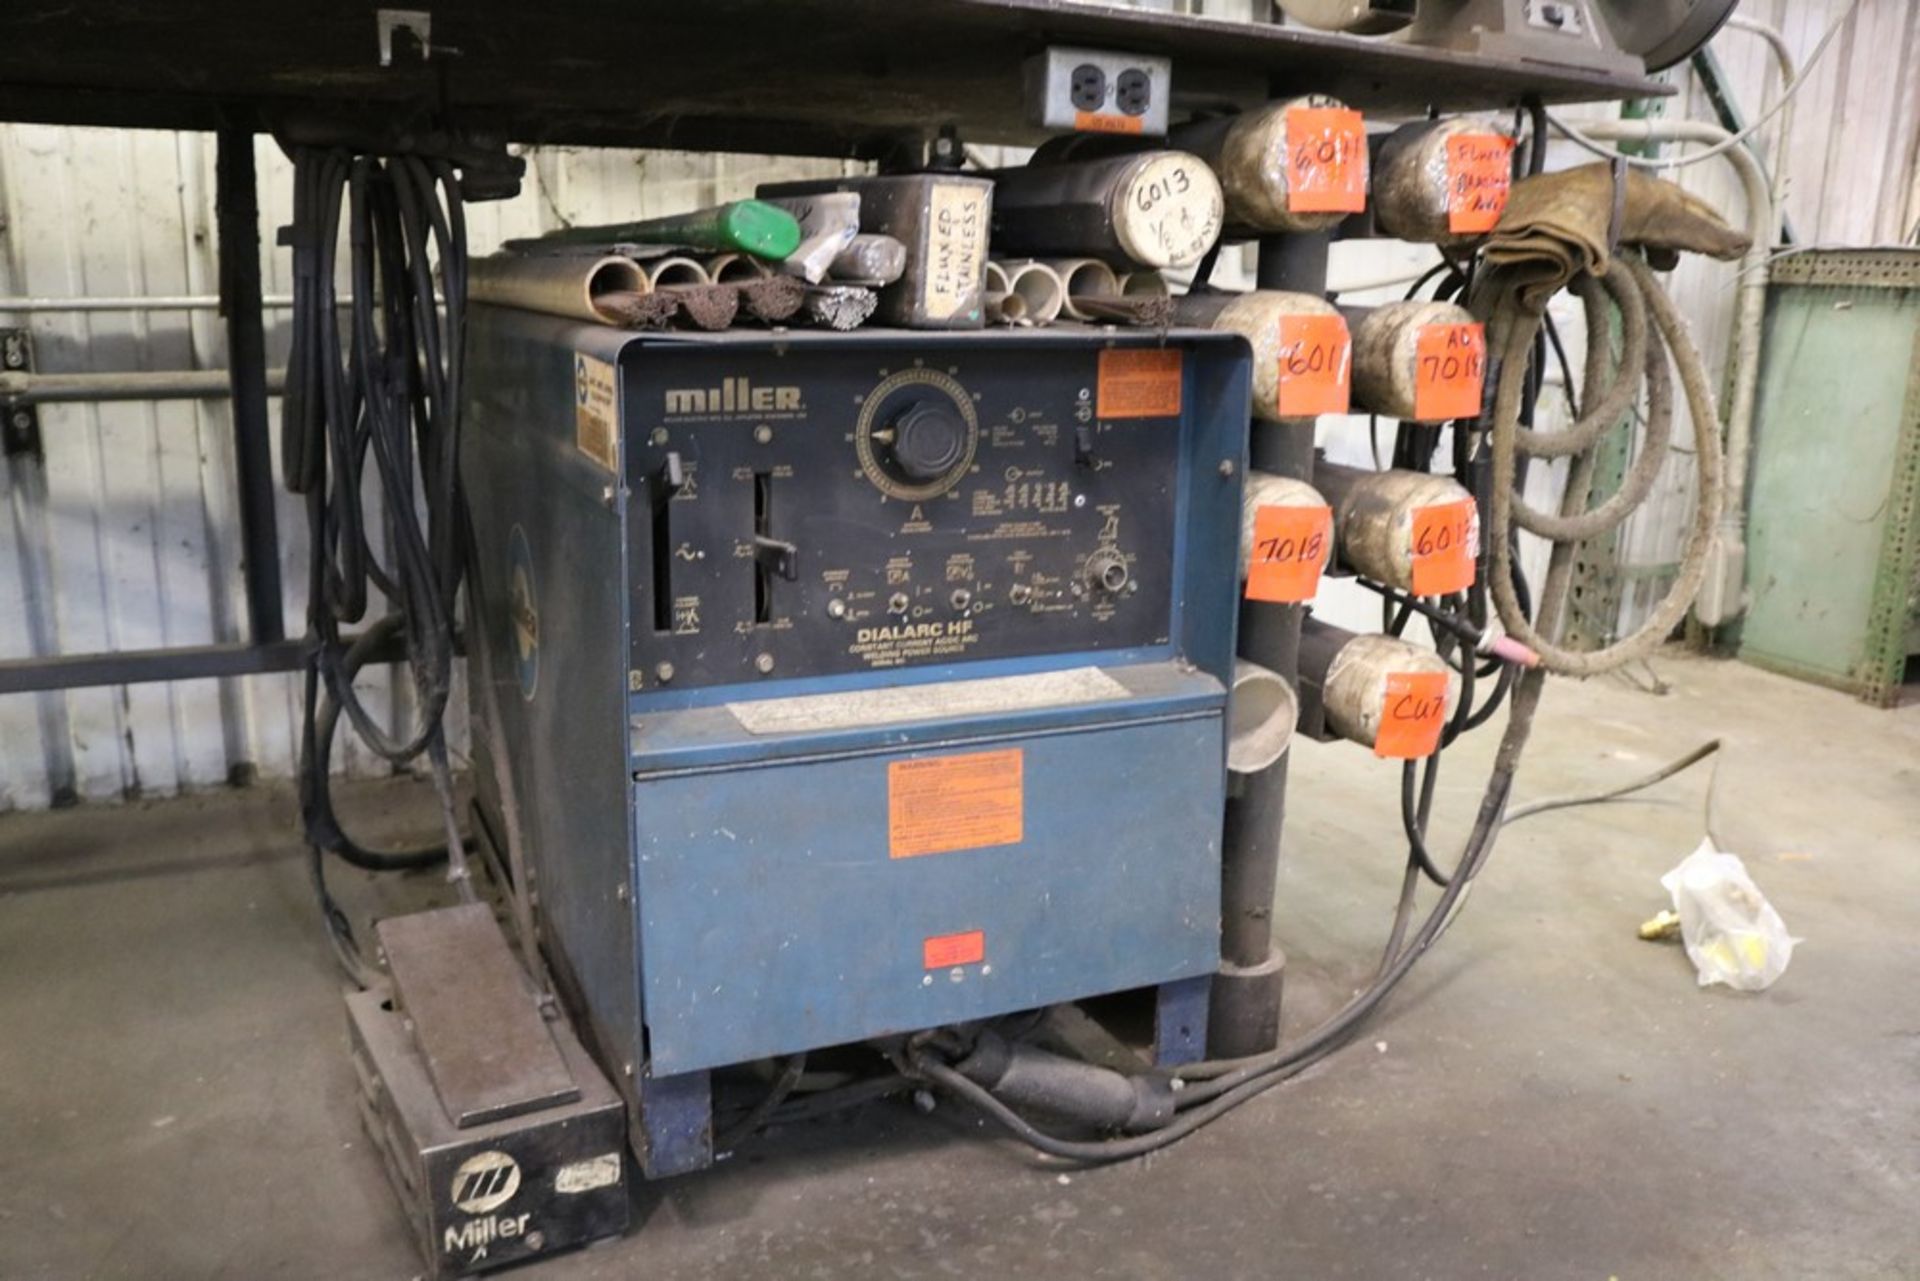 1989 Miller Dialarc HF Tig Welder with Various Welding Rods, Face Masks, Welding Parts and